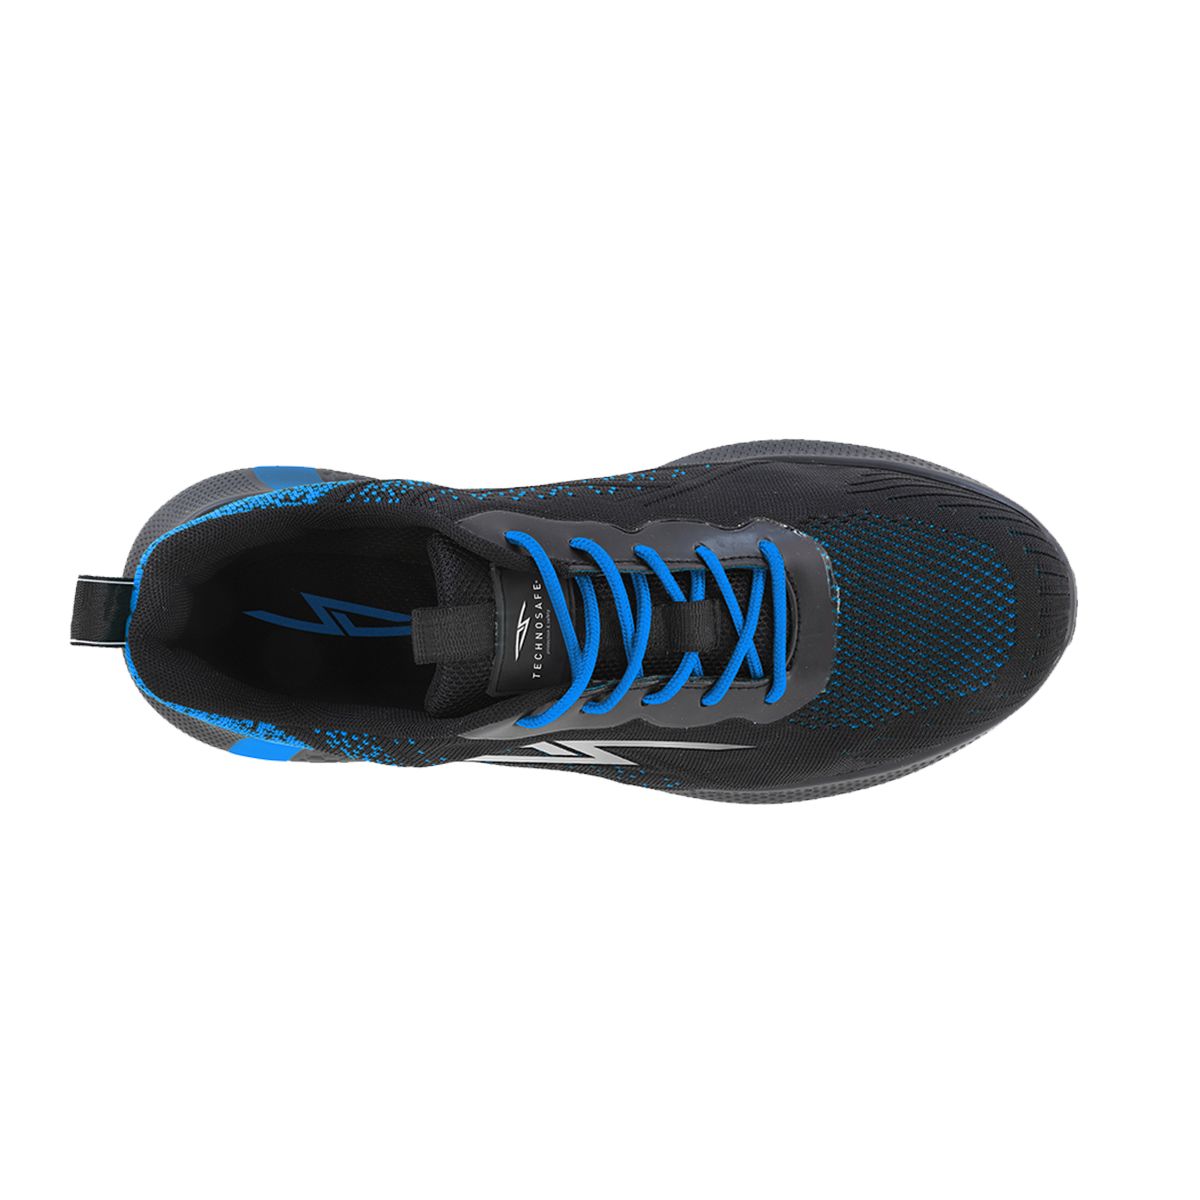 Neon Safety Shoes Blue Shock S3 Low